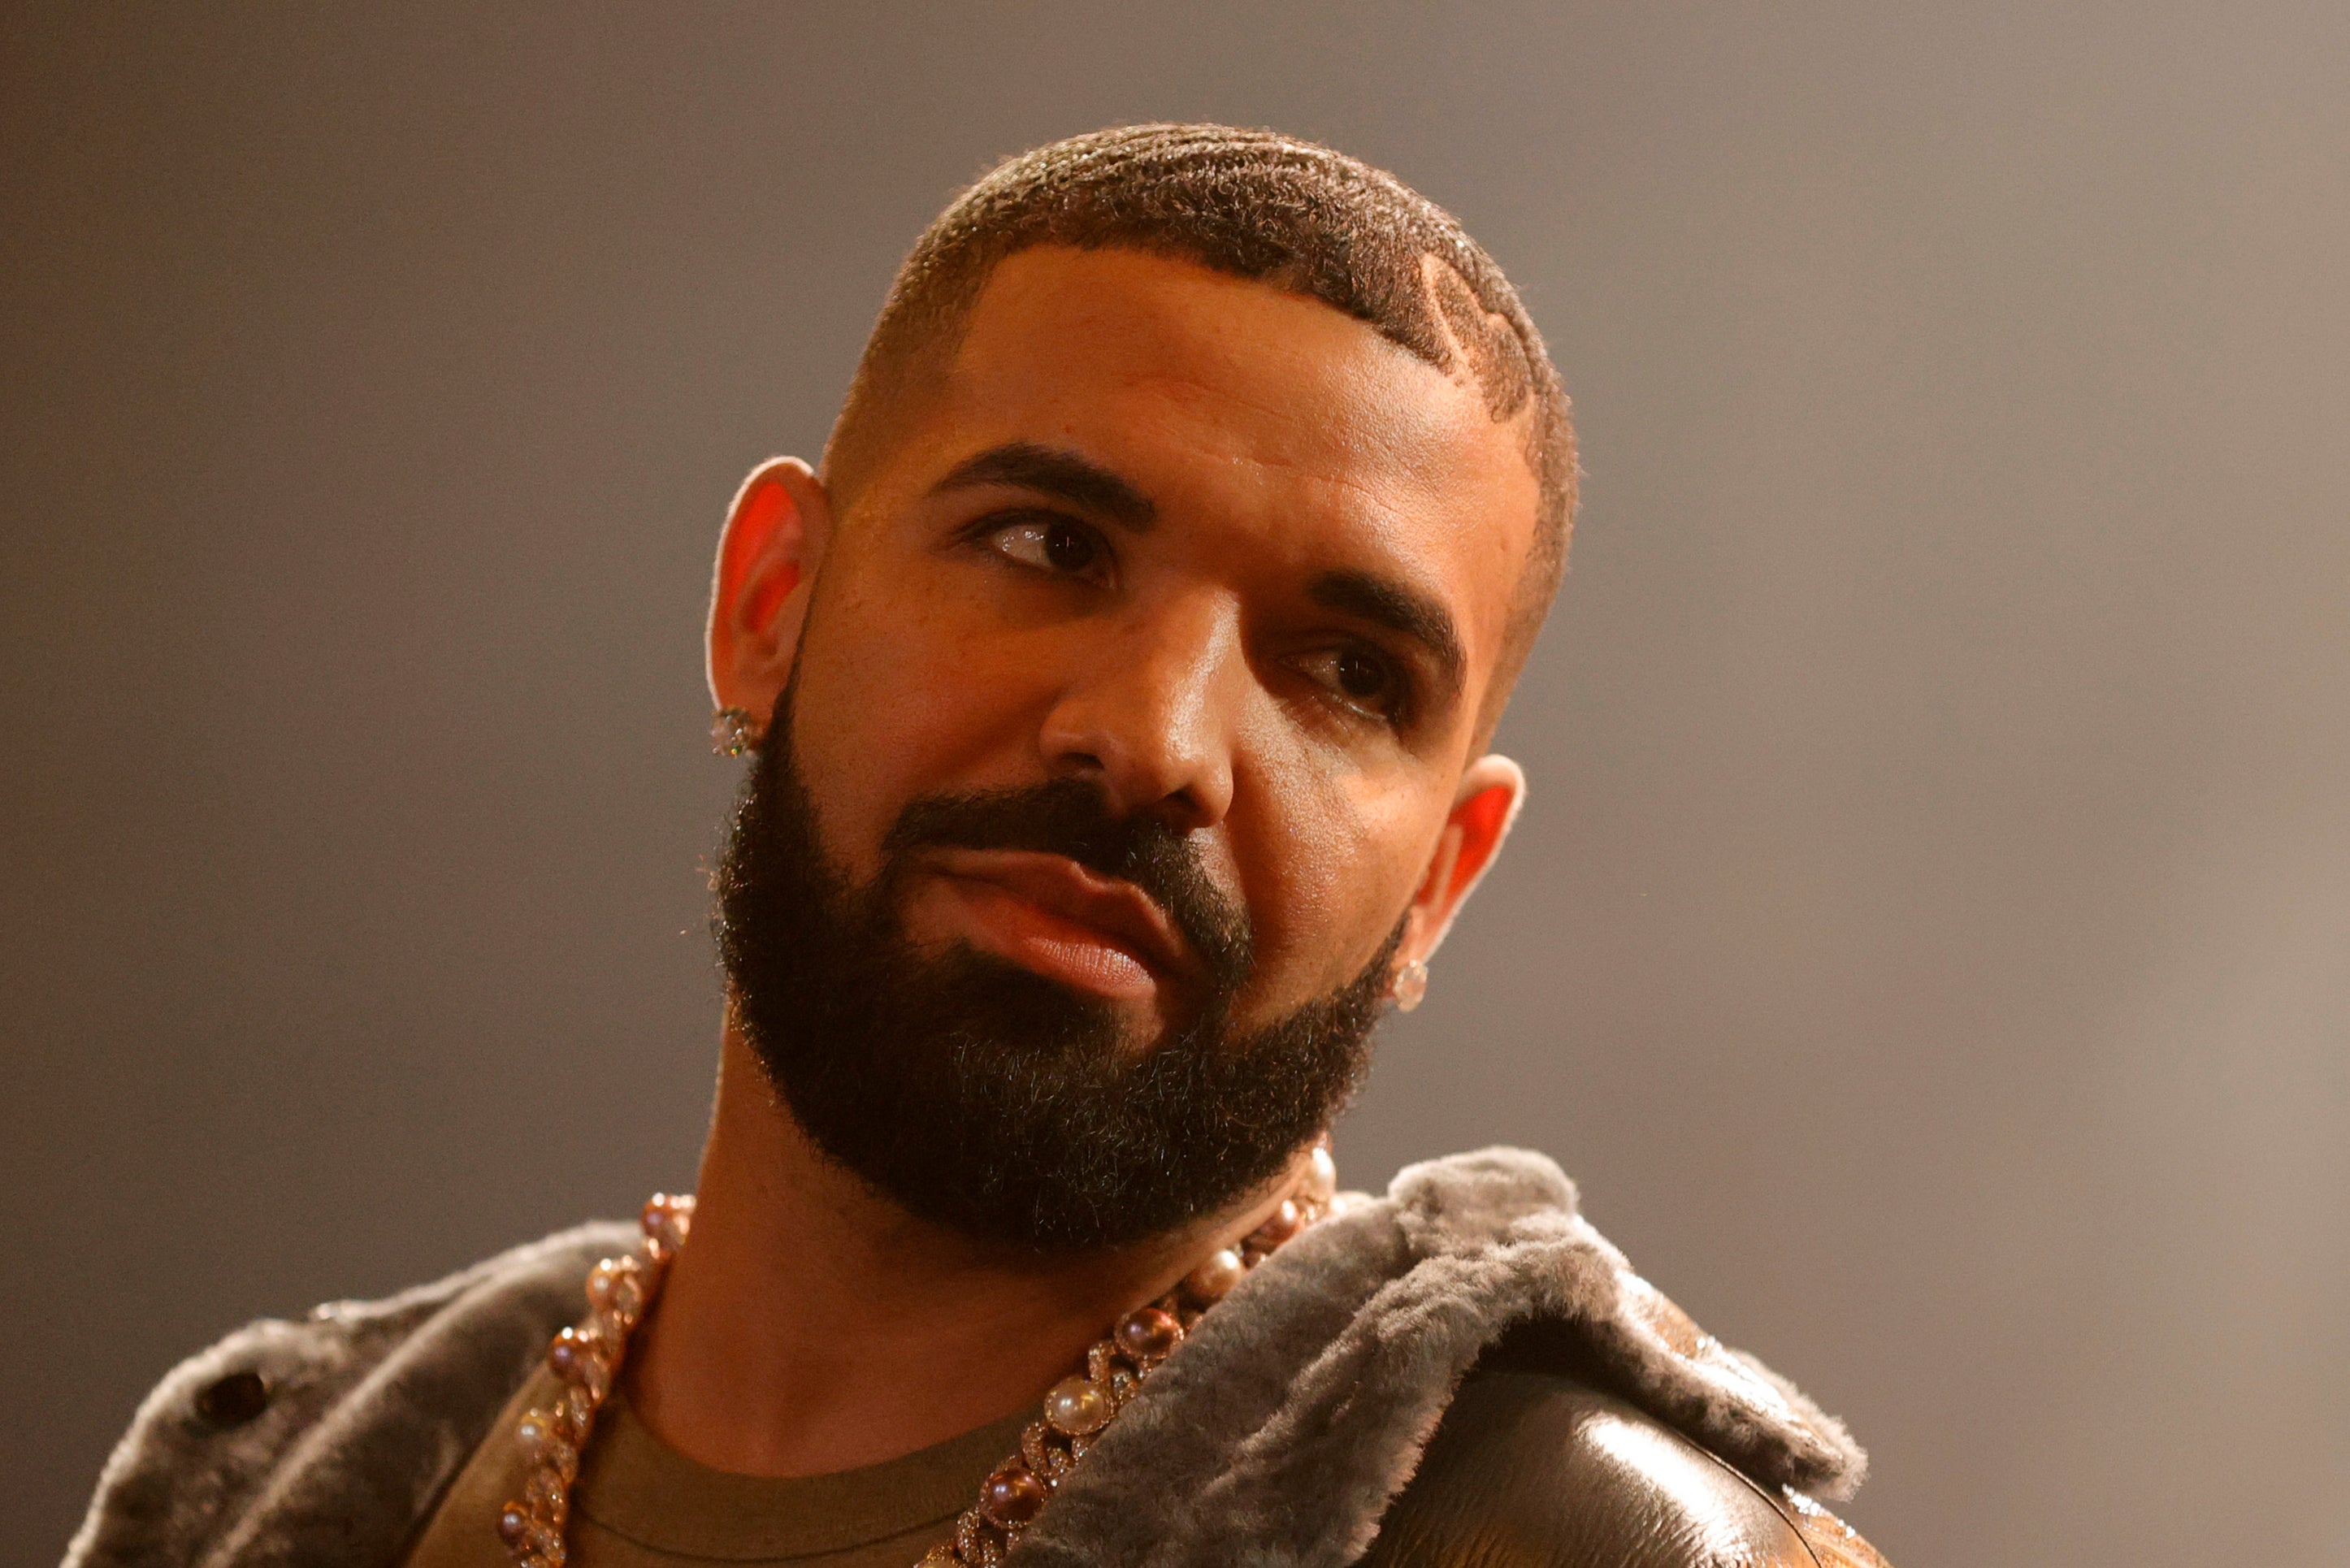 Drake is among those in the music industry who has expressed support for YSL